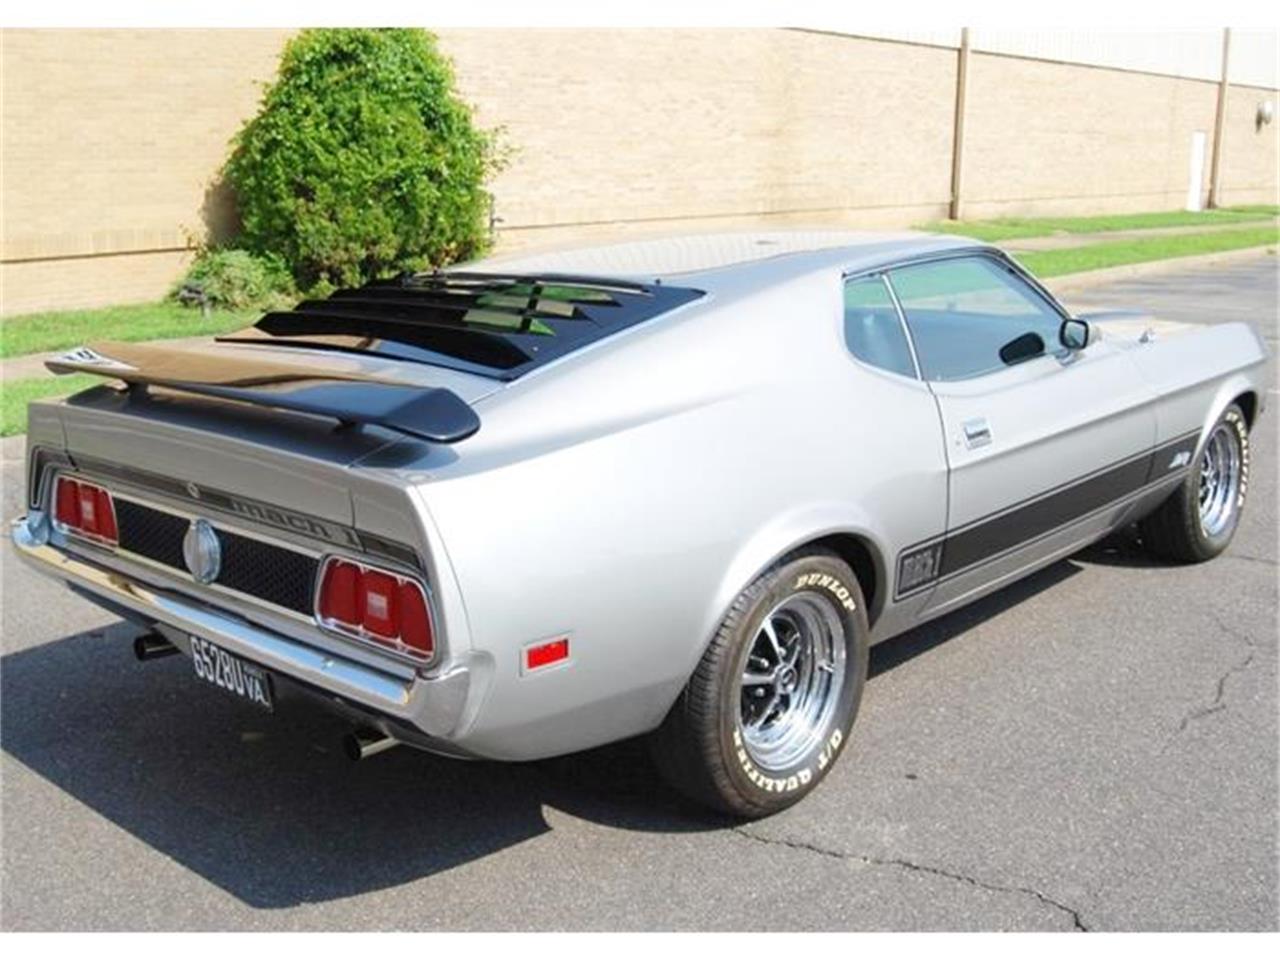 1973 Ford Mustang Mach 1 for Sale | ClassicCars.com | CC-825393